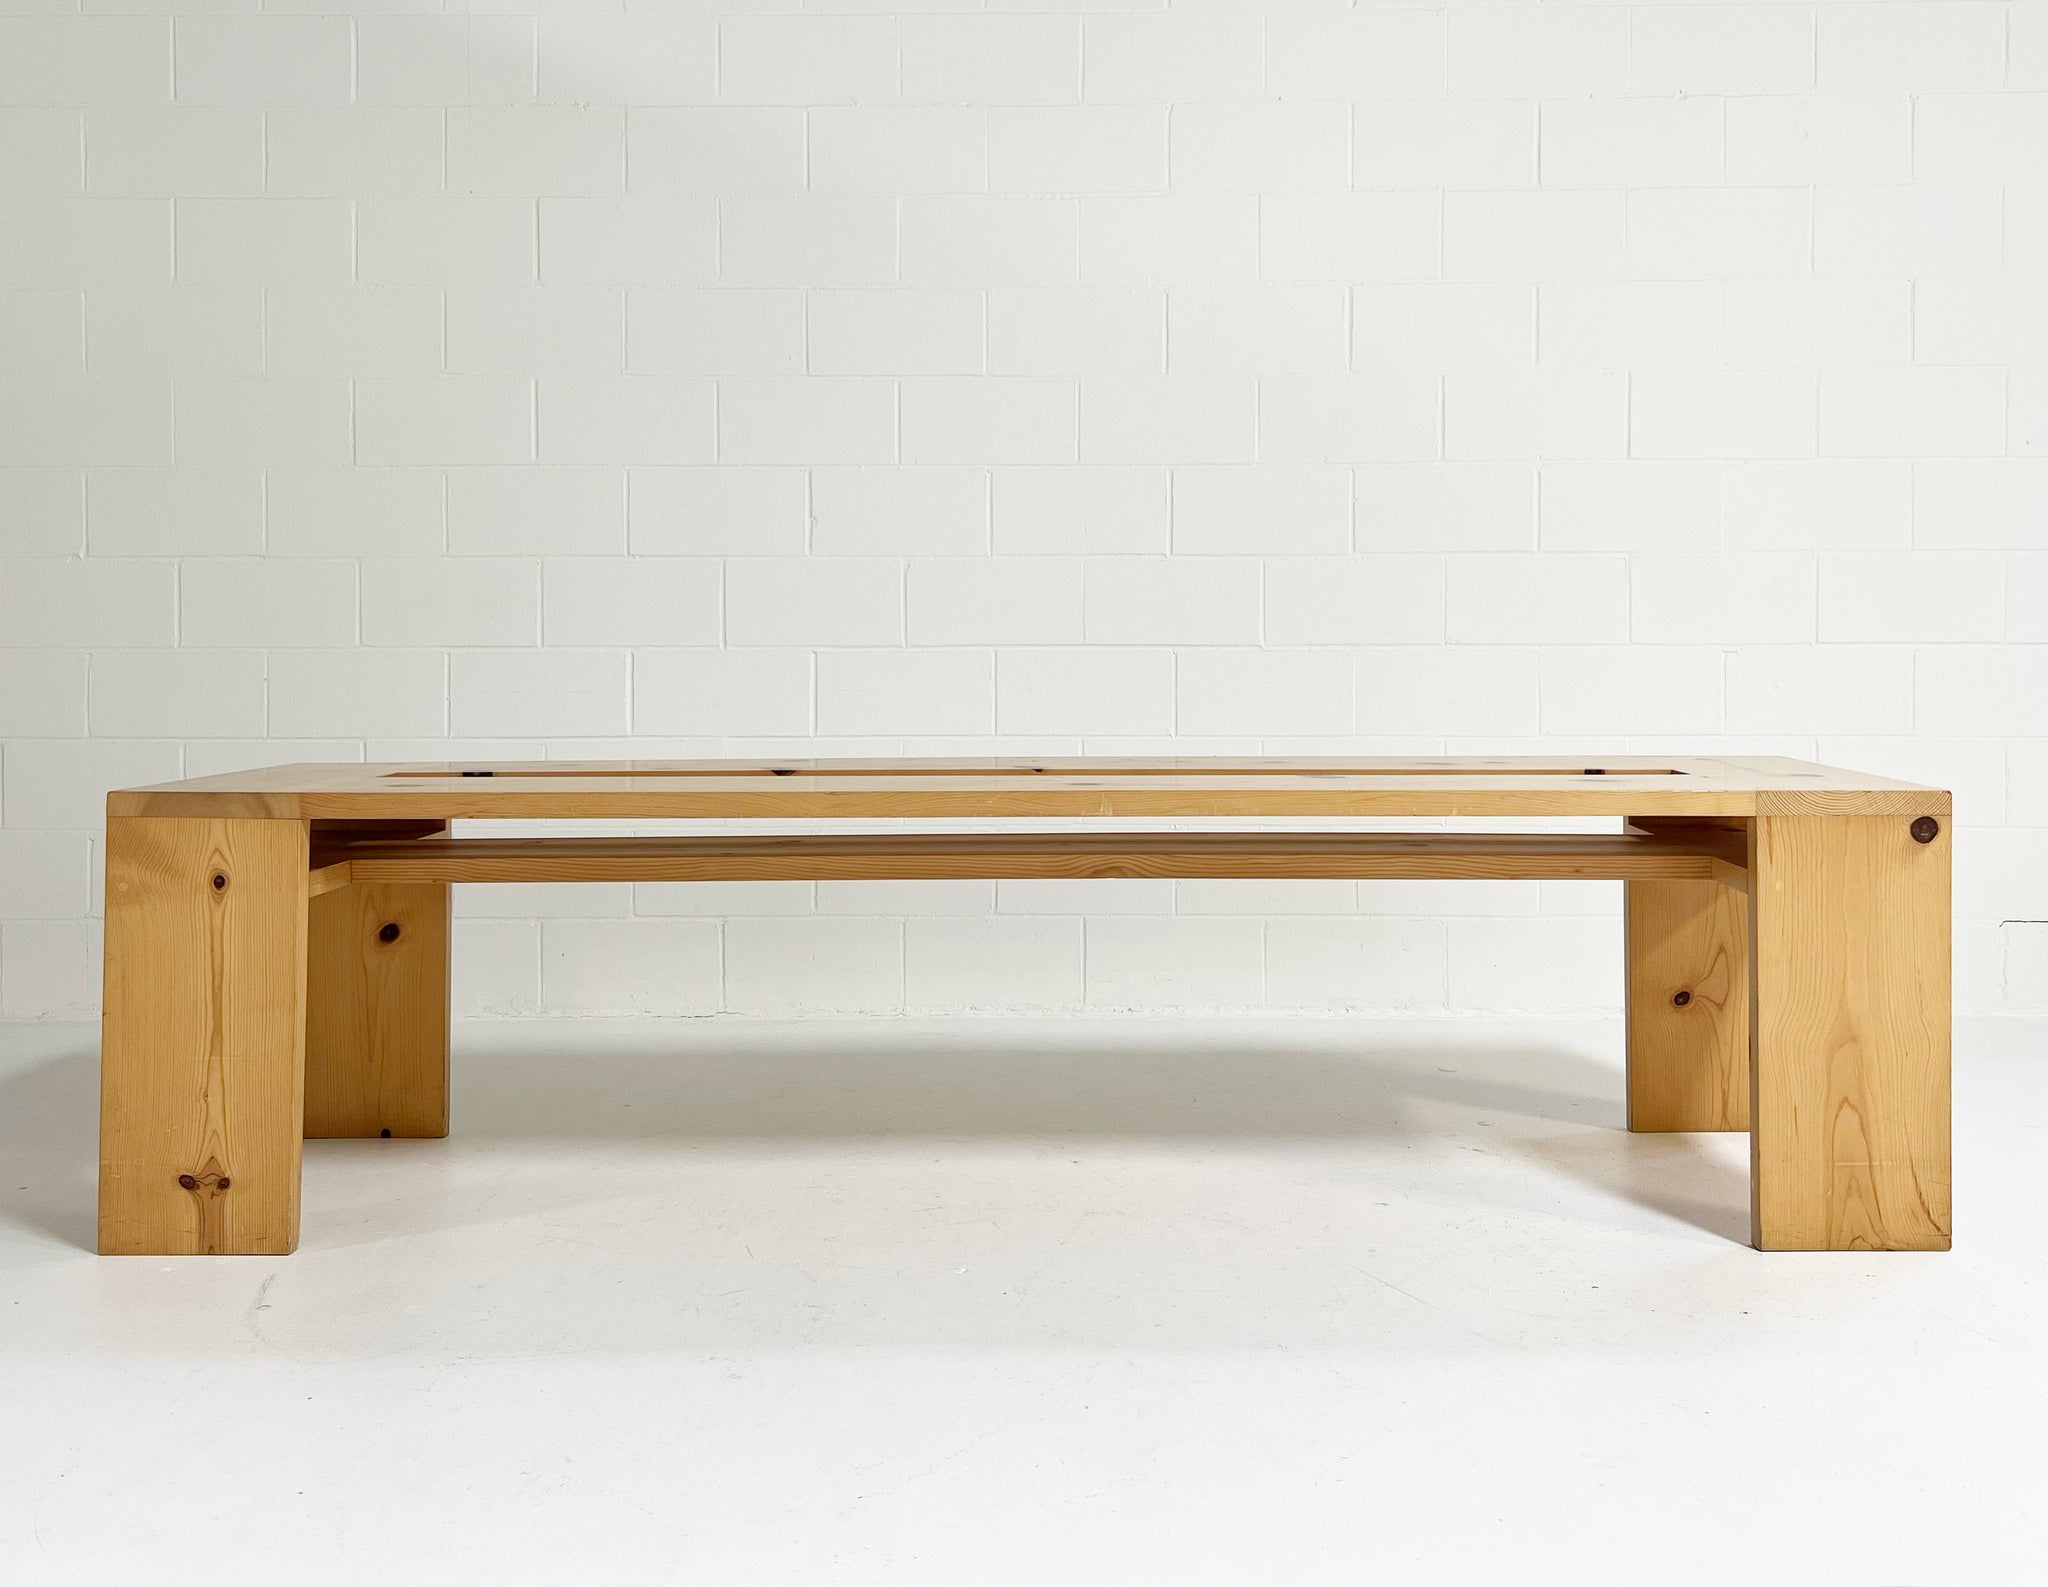 Slotted Library Tables Selected by John Pawson for the 1995 Calvin Klein Store in New York, Two Available